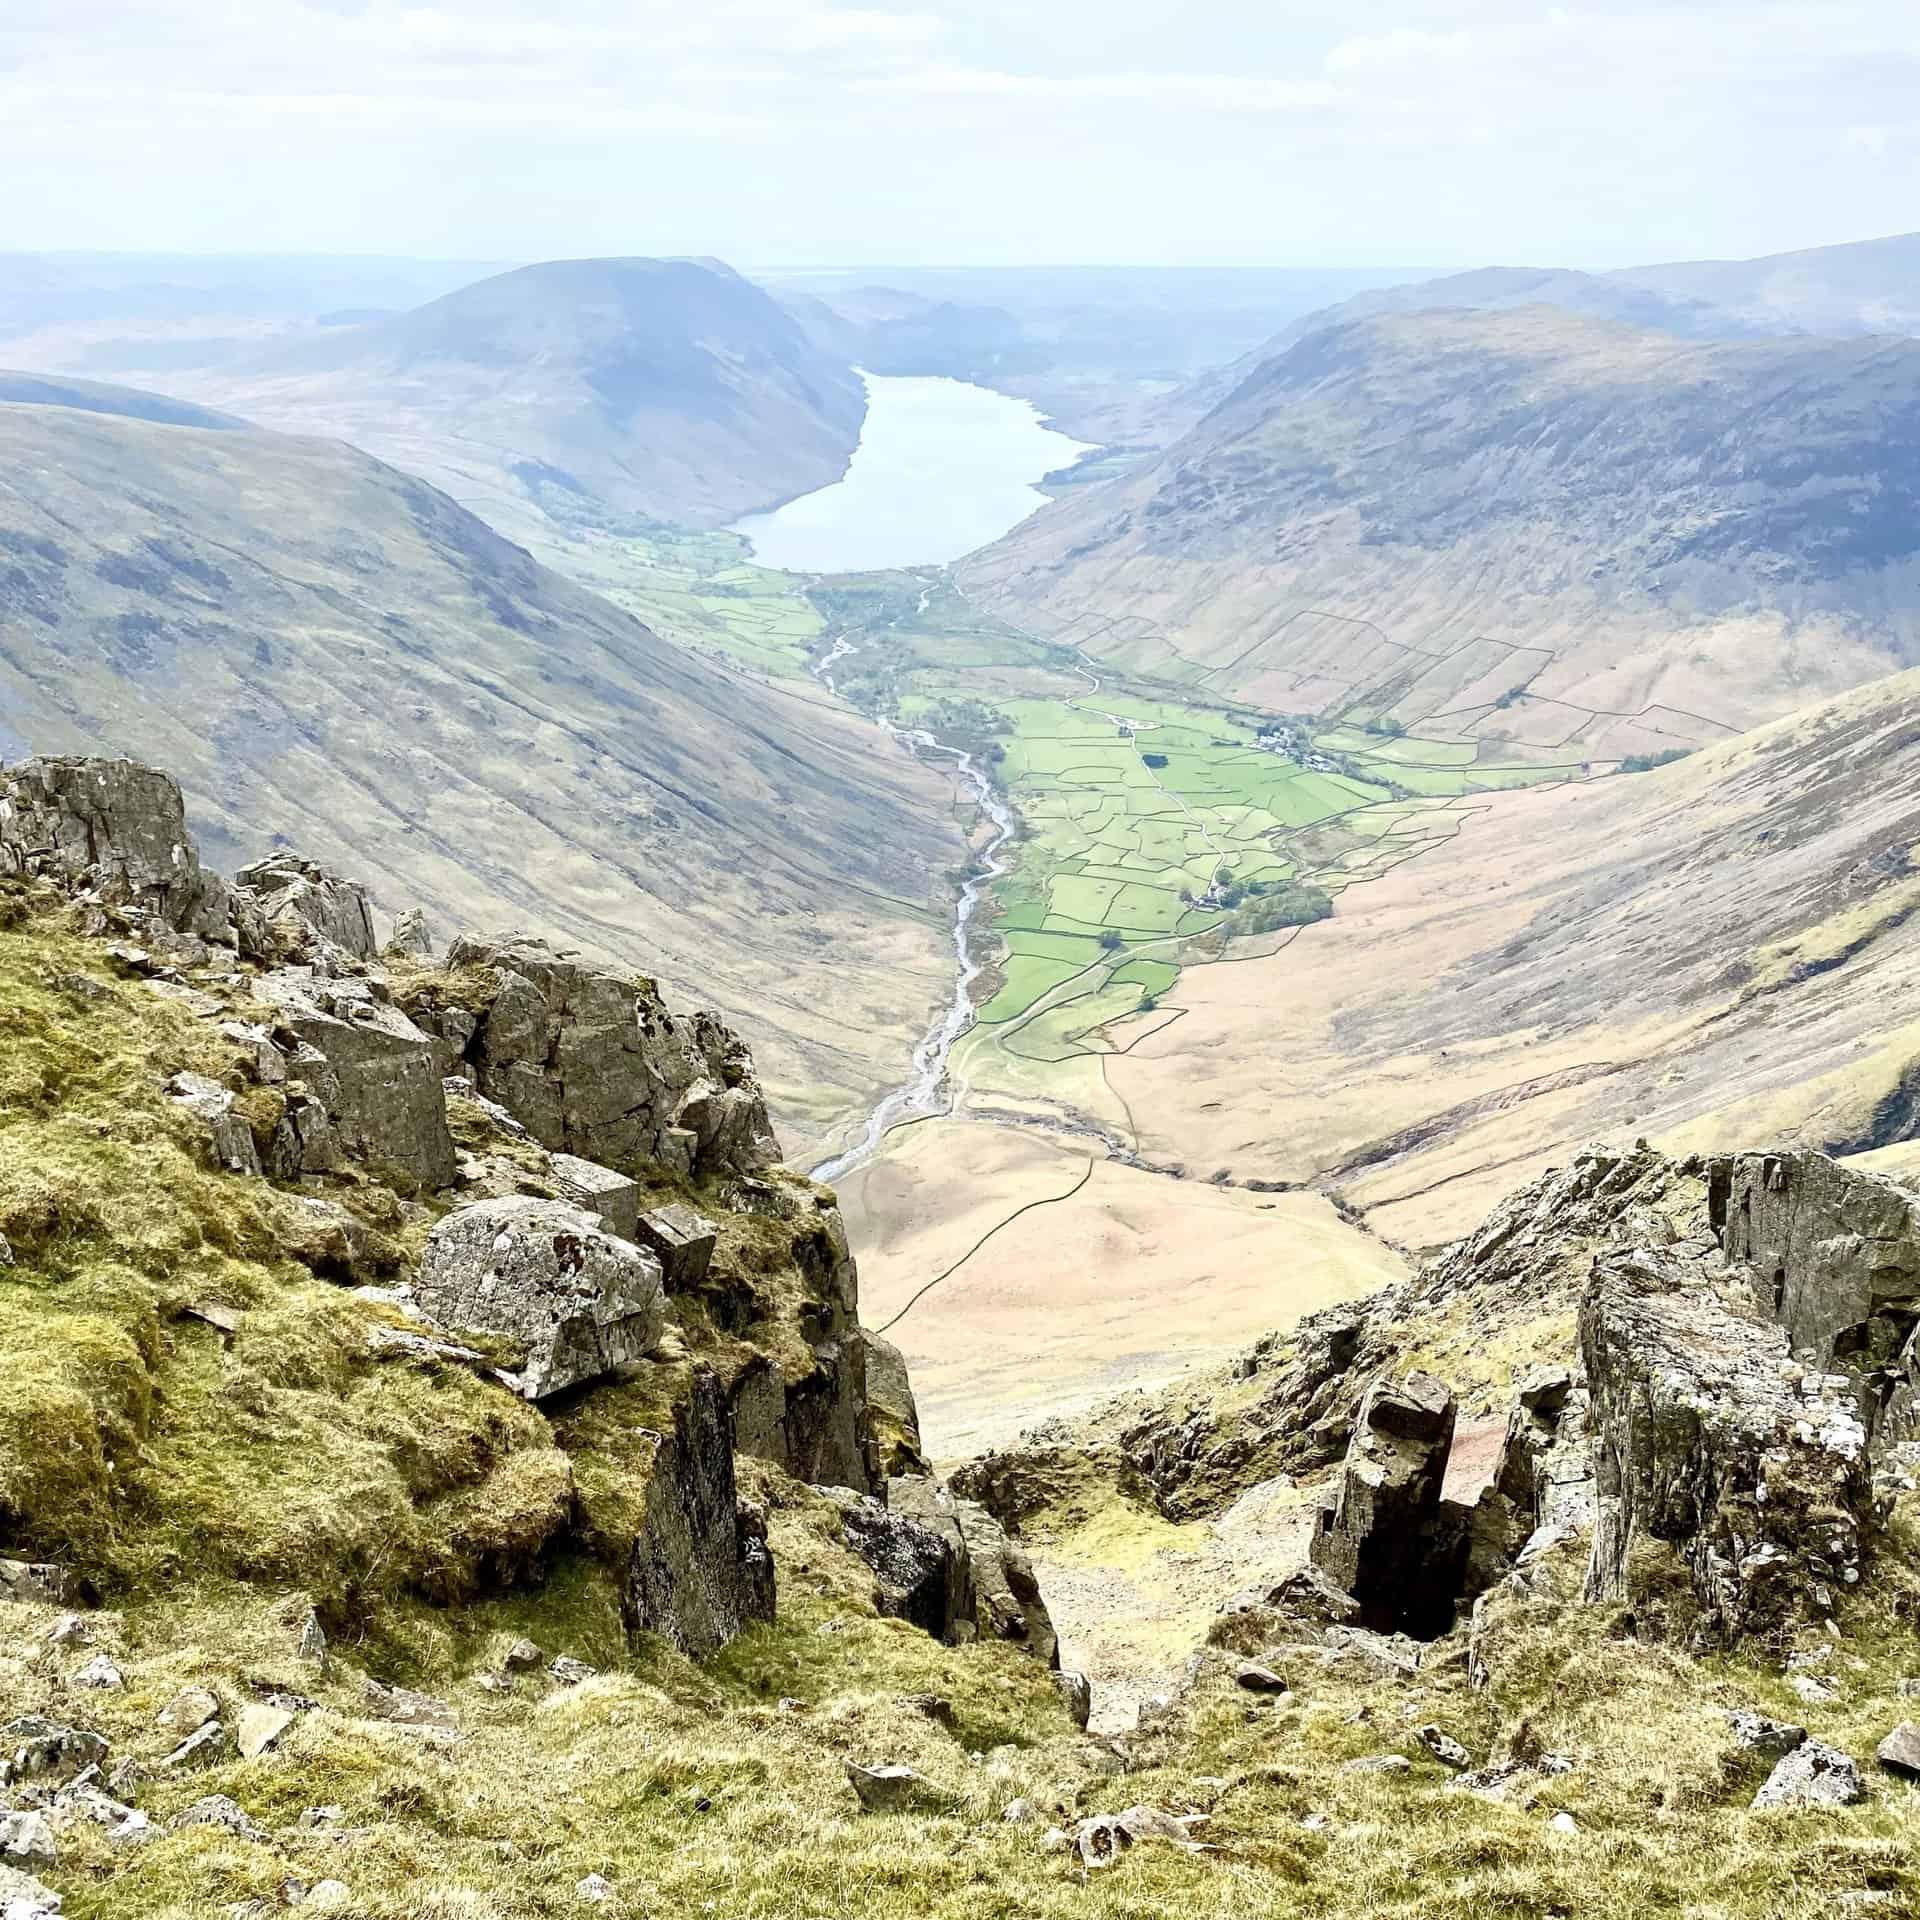 Wast Water as seen from Westmorland Cairn, one of the many highlights on this Great Gable walk.